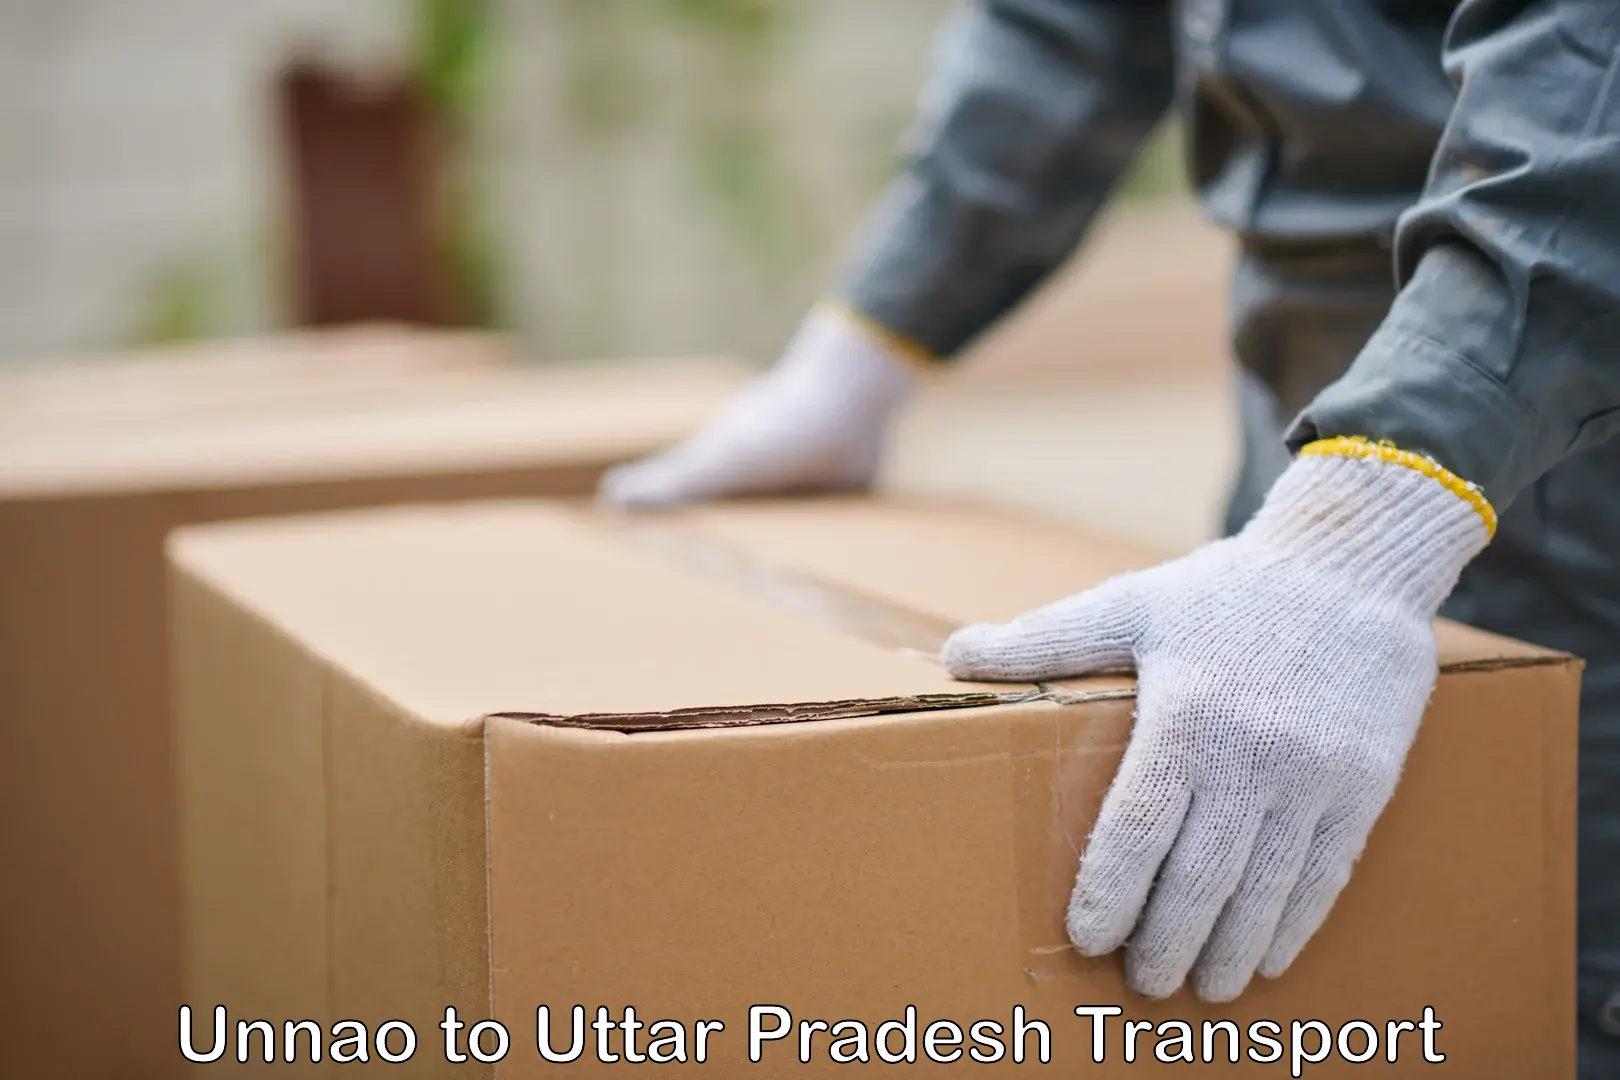 Truck transport companies in India Unnao to Chitrakoot